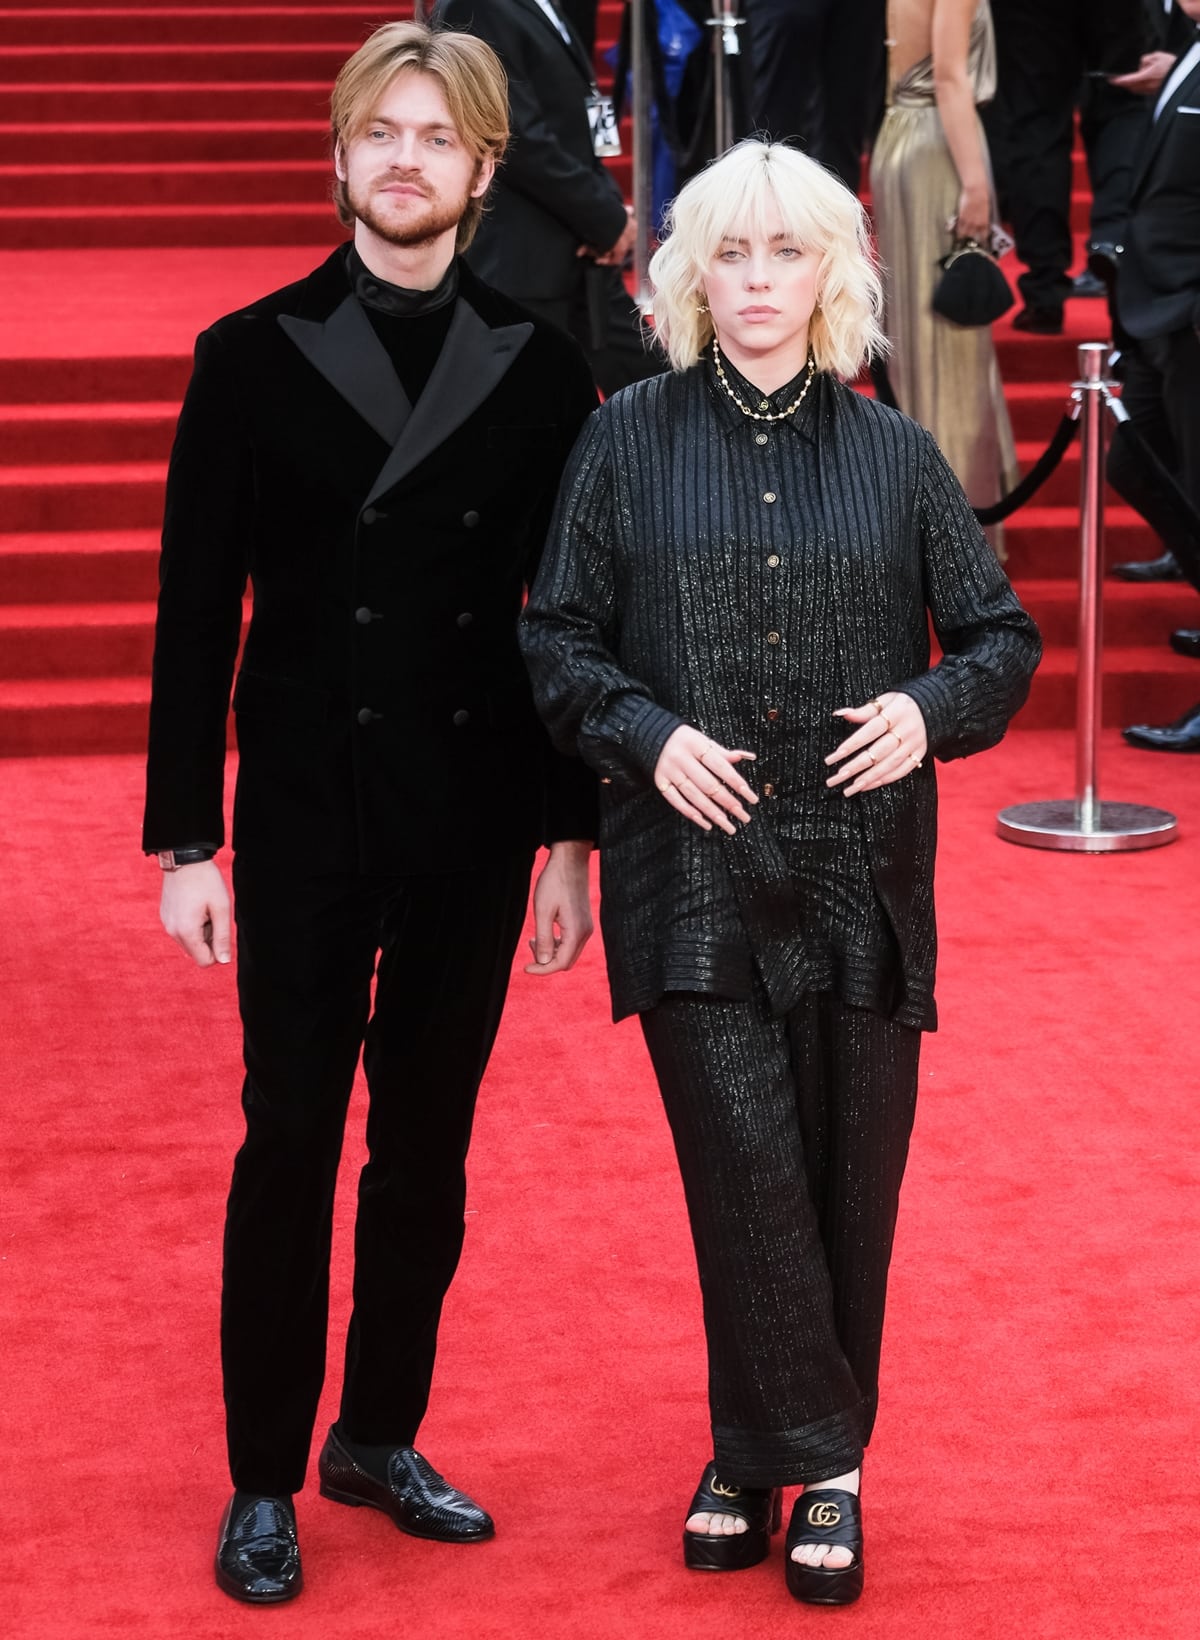 Finneas and Billie Eilish wear Gucci for the World Premiere of No Time To Die